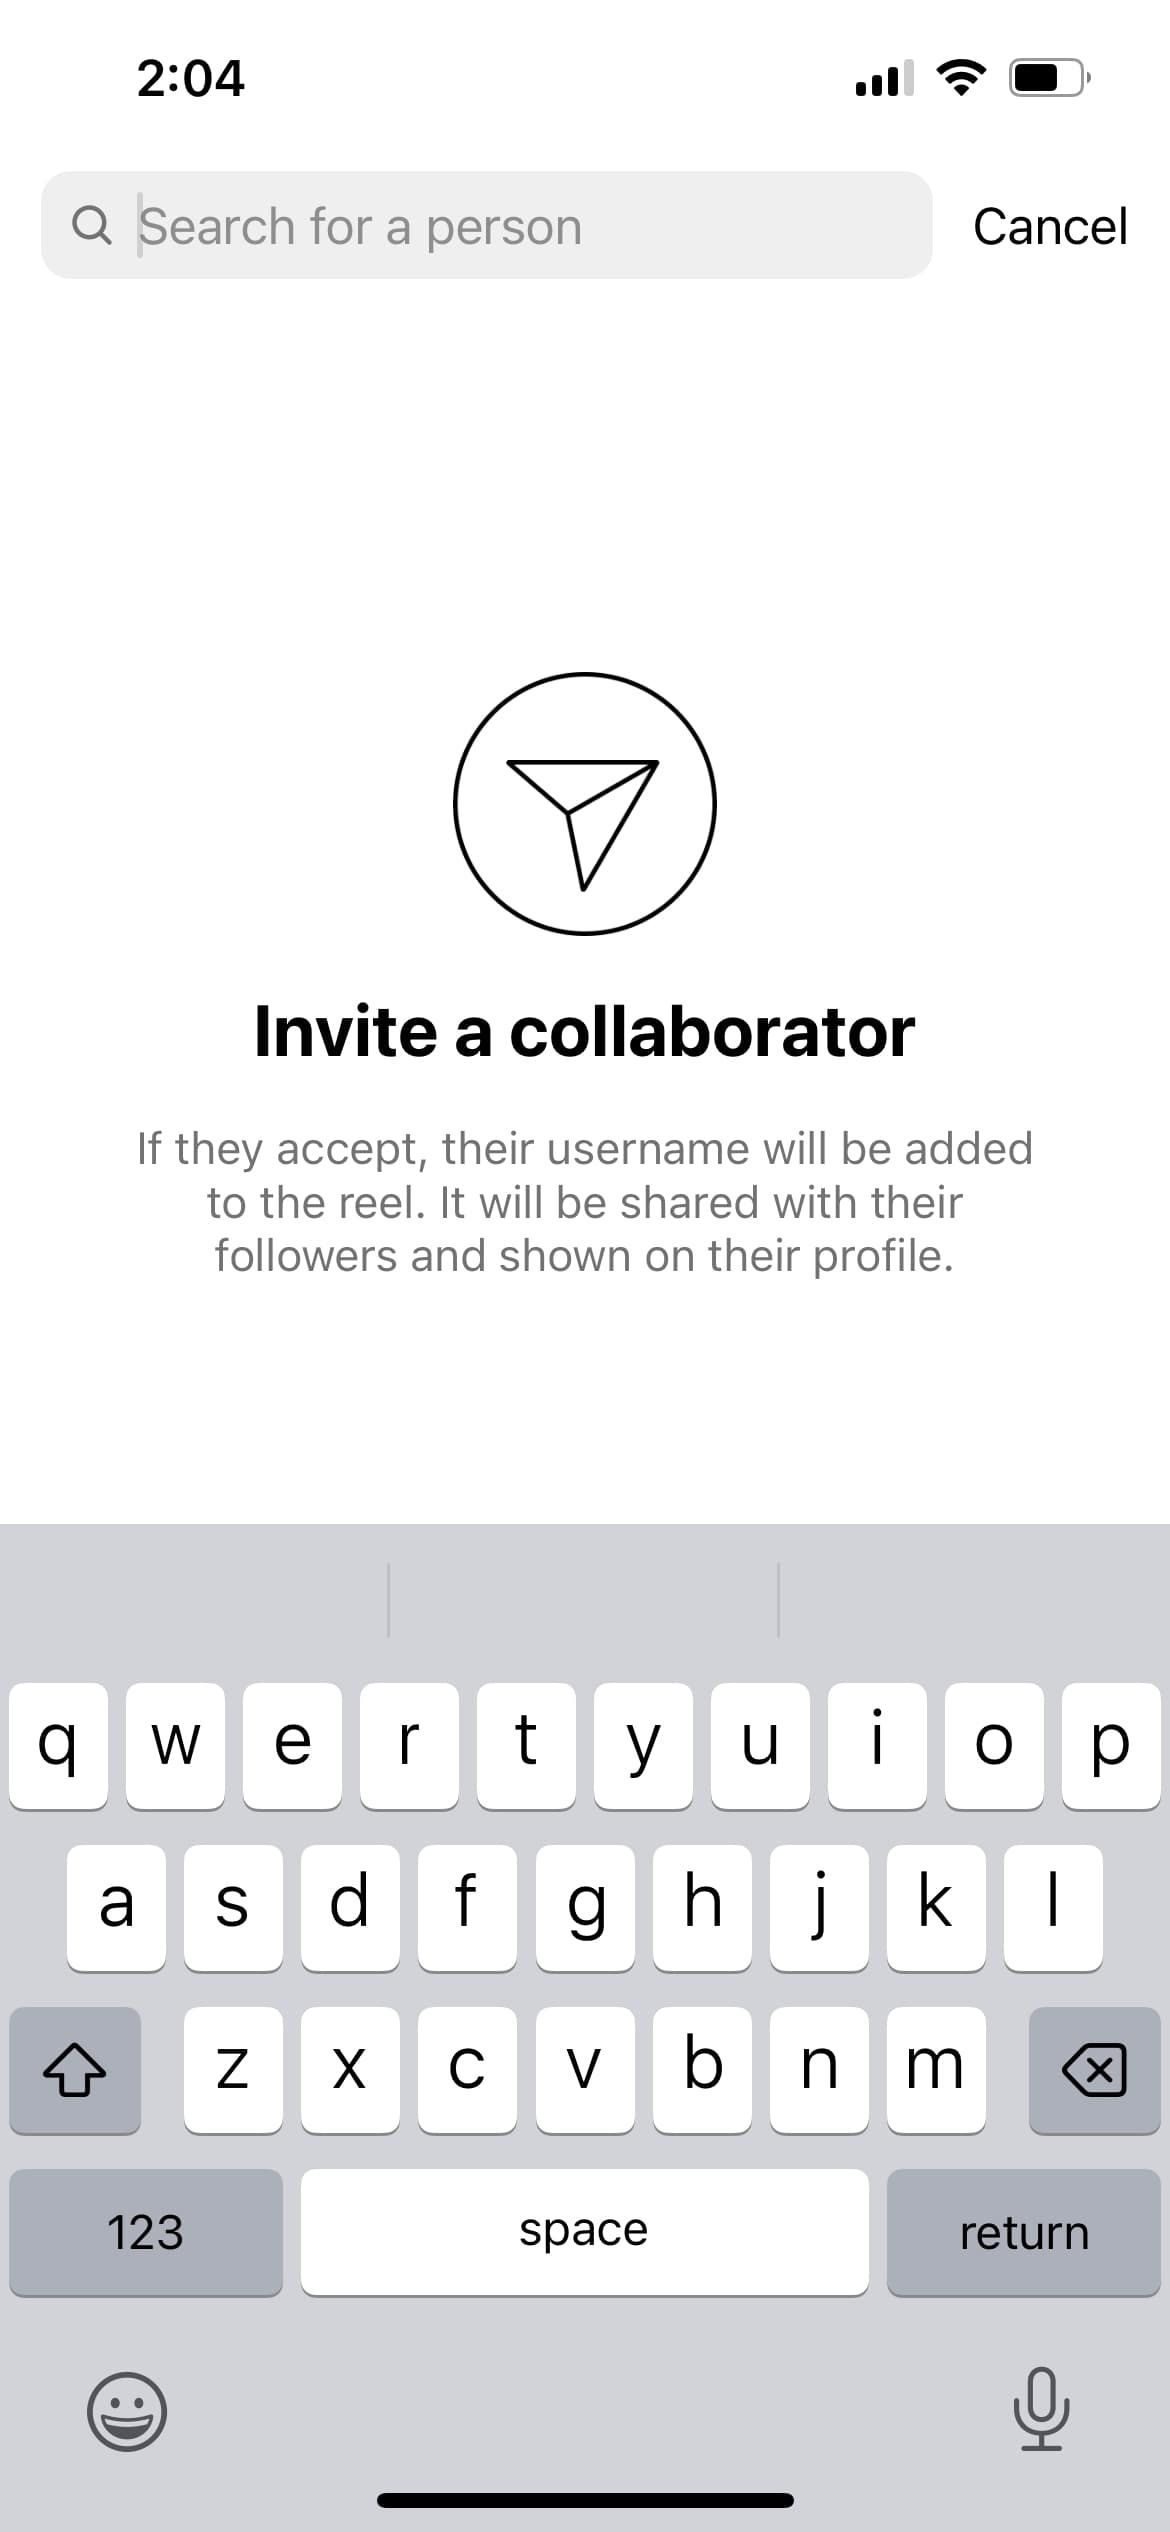 Inviting a Collaborator on Instagram